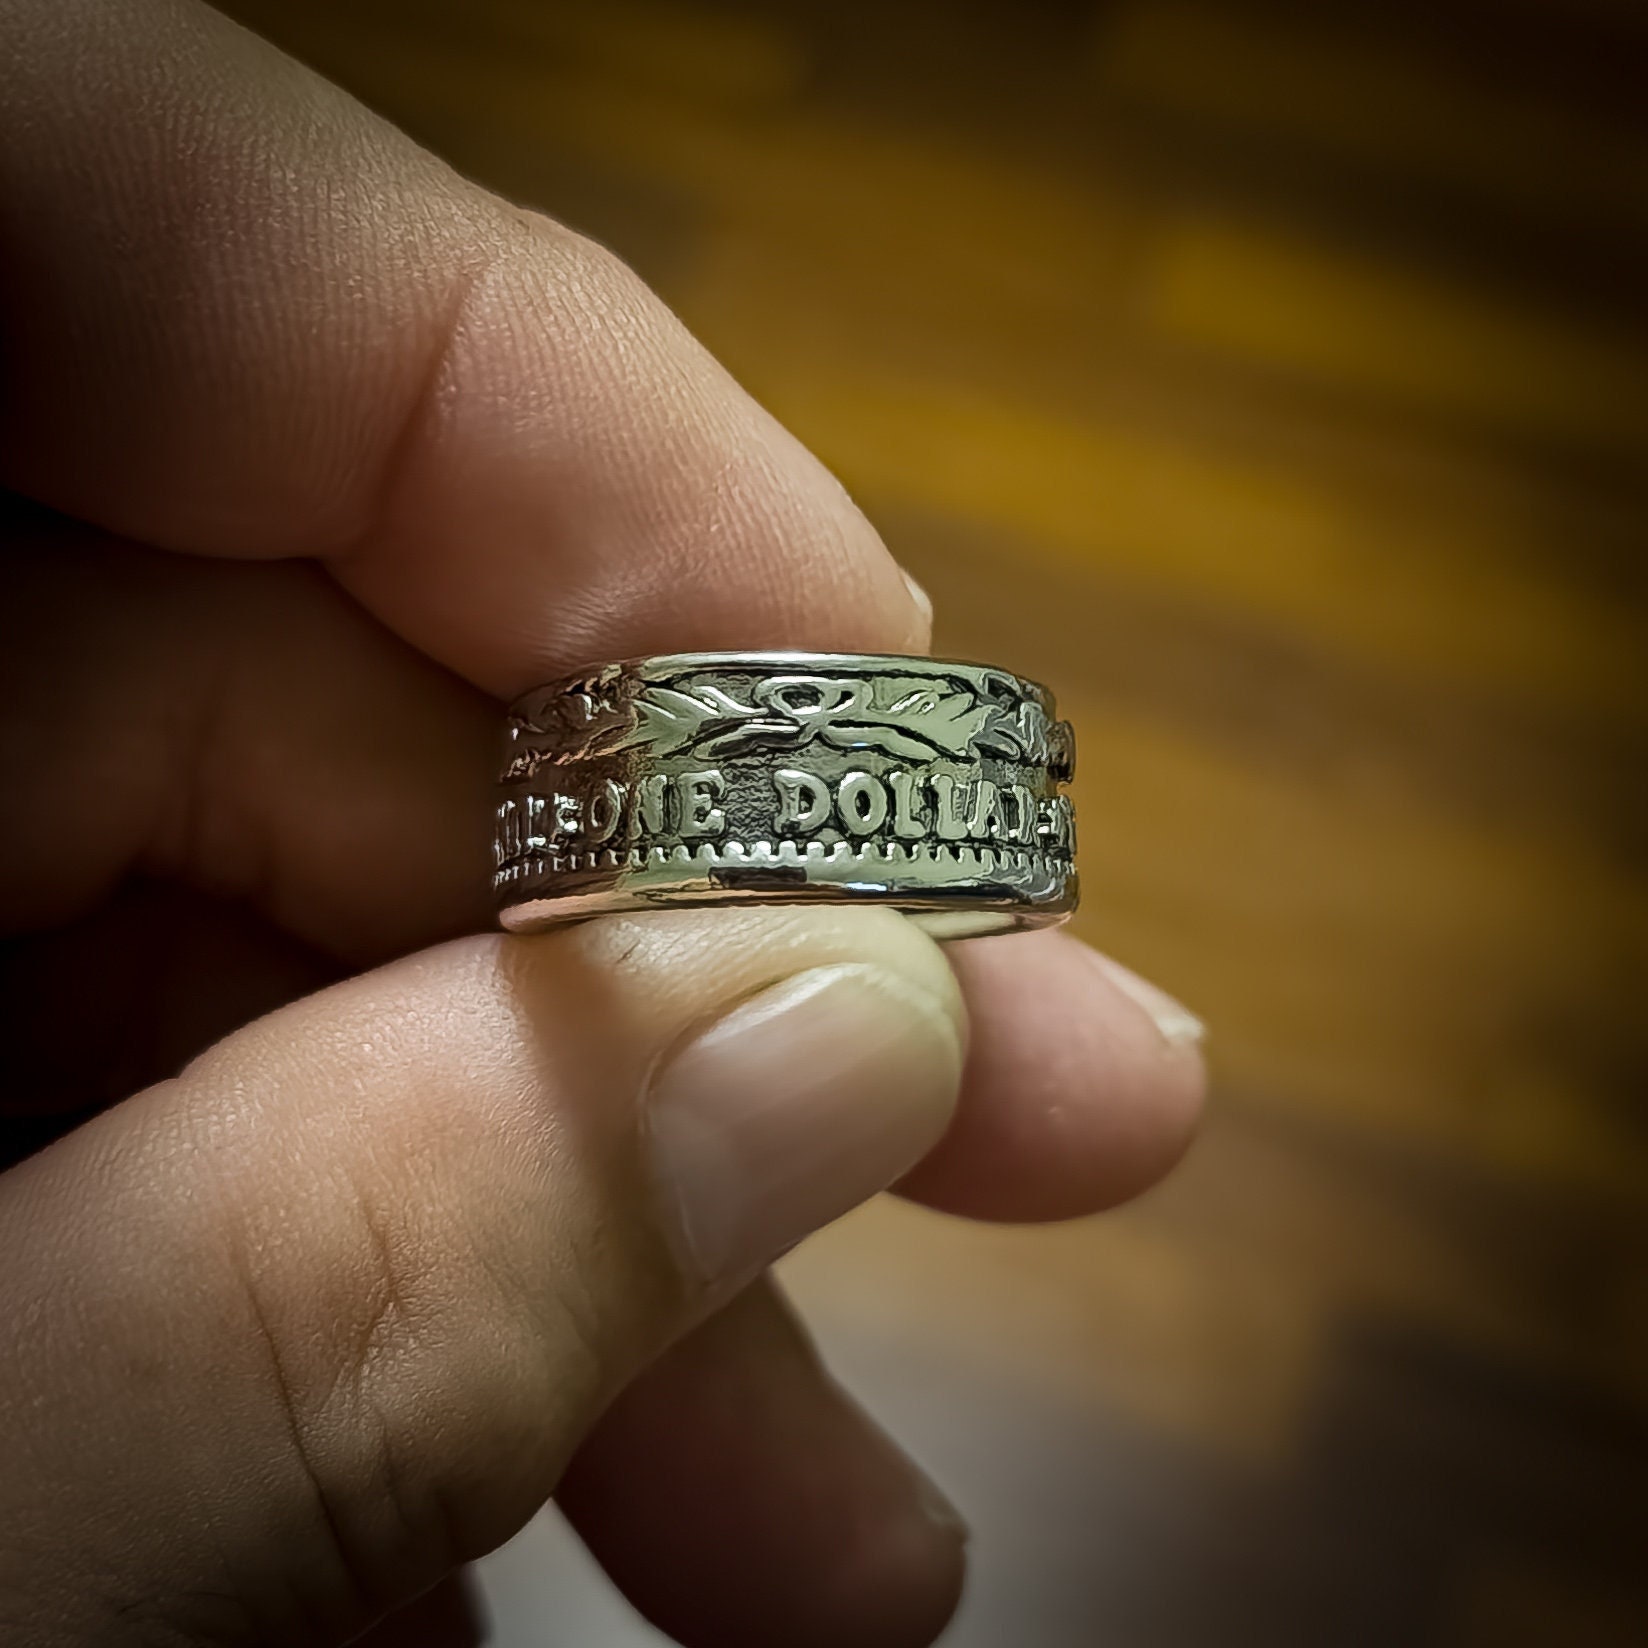 Japanese 1 Sen Coin Ring With Distressed Silver Finish - Etsy